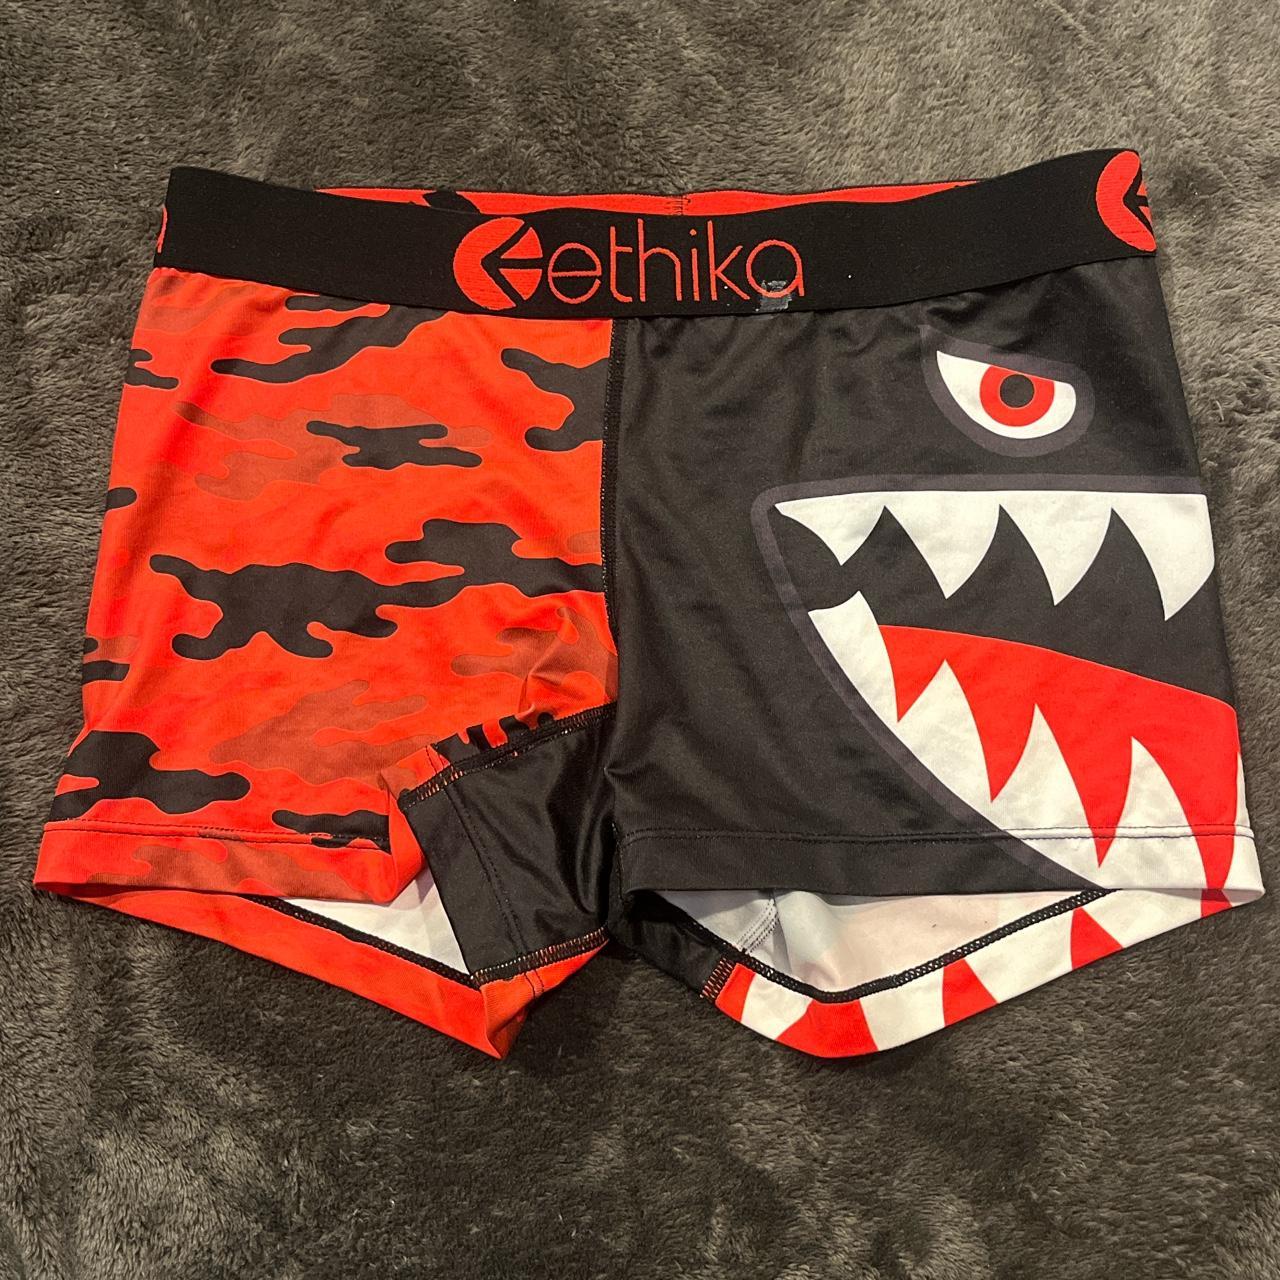 Ethika athletic shorts Very comfortable material A - Depop